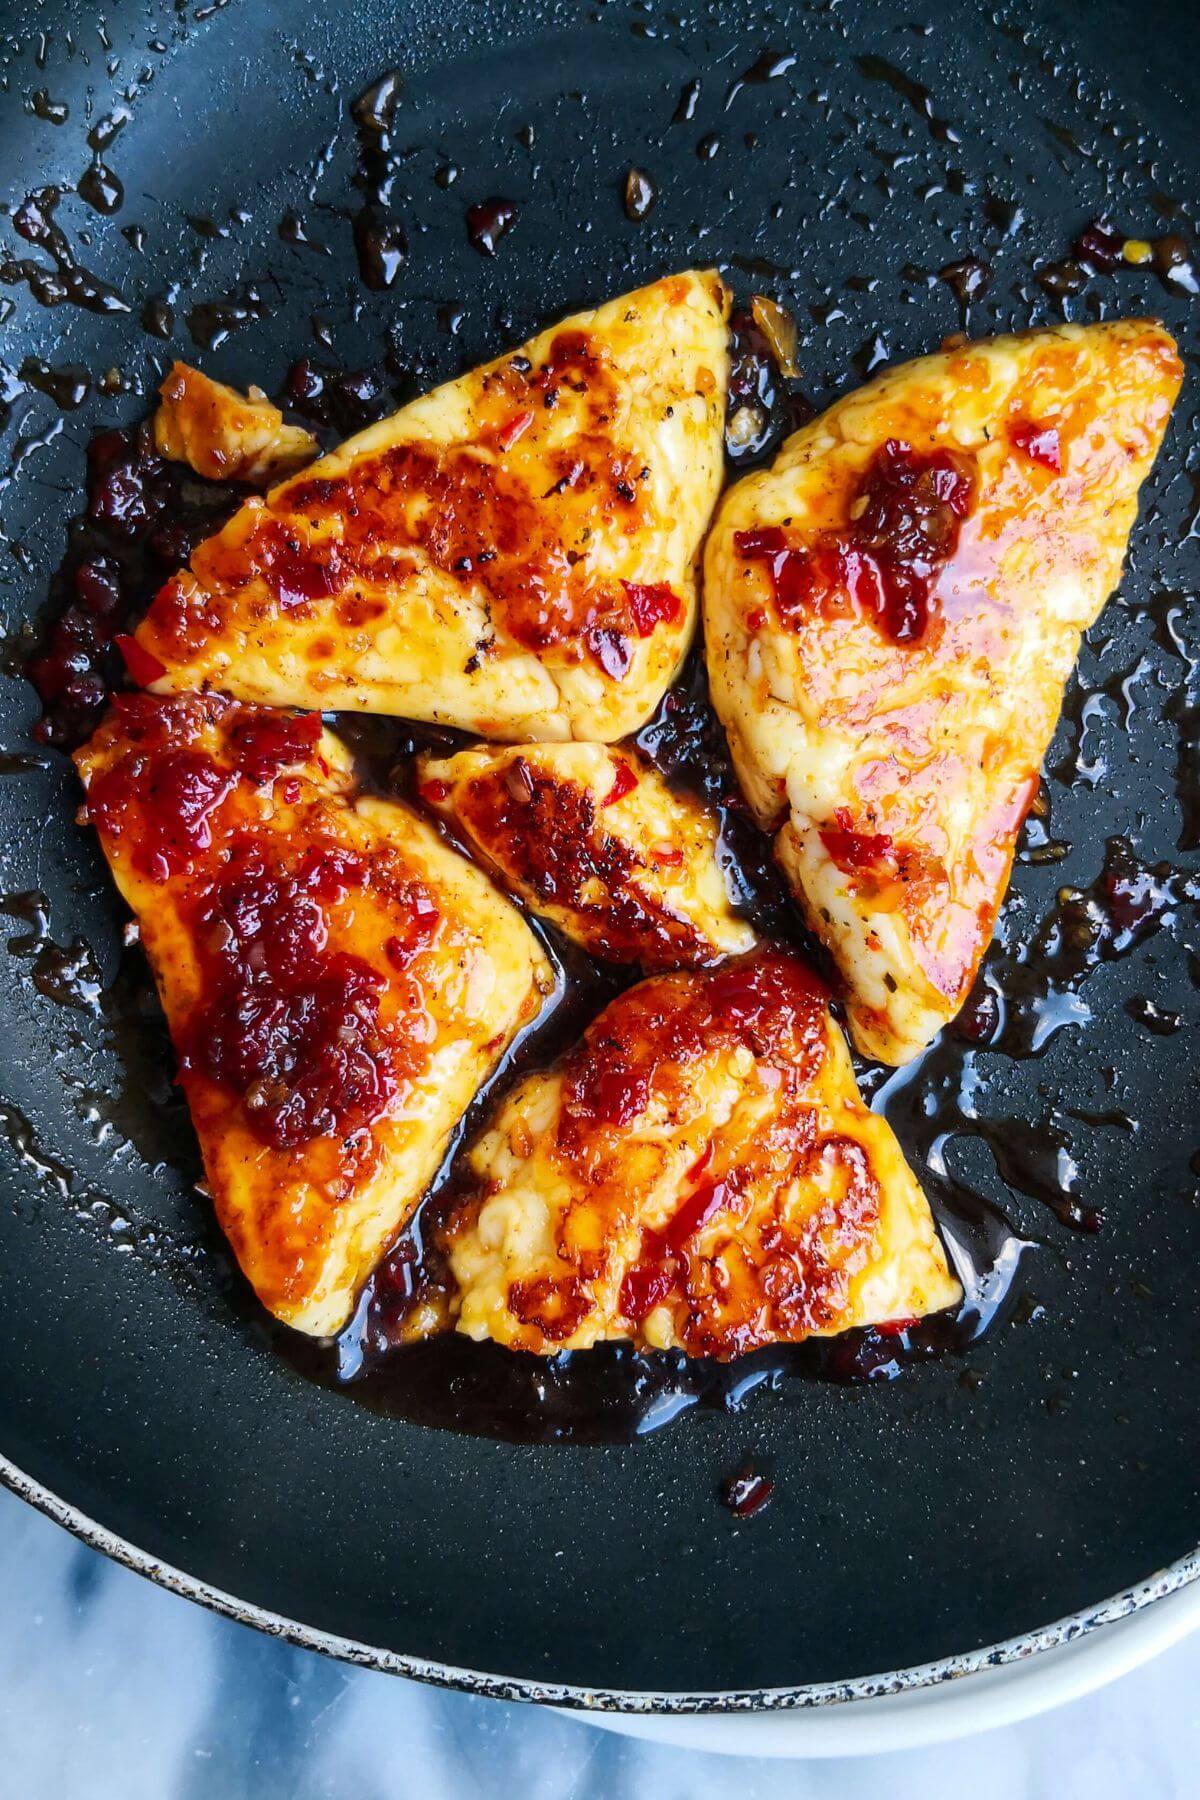 5 golden sweet chilli jam glazed halloumi triangles in a small black pan.